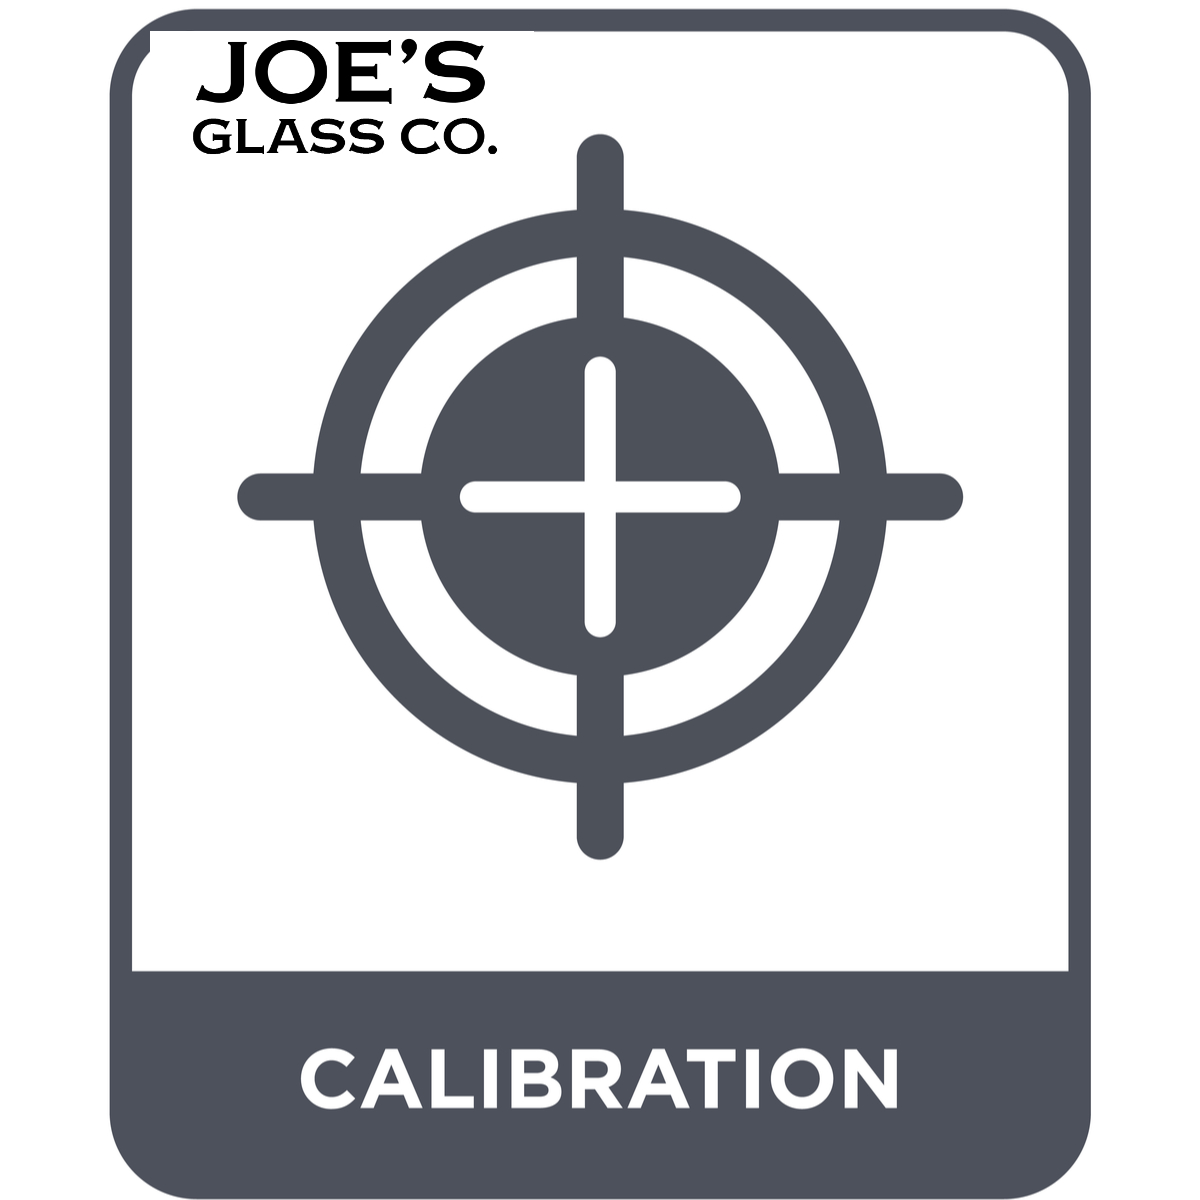 Head to Joe’s Glass Co. for Windshield Calibration to Meet Your Auto Glass Needs